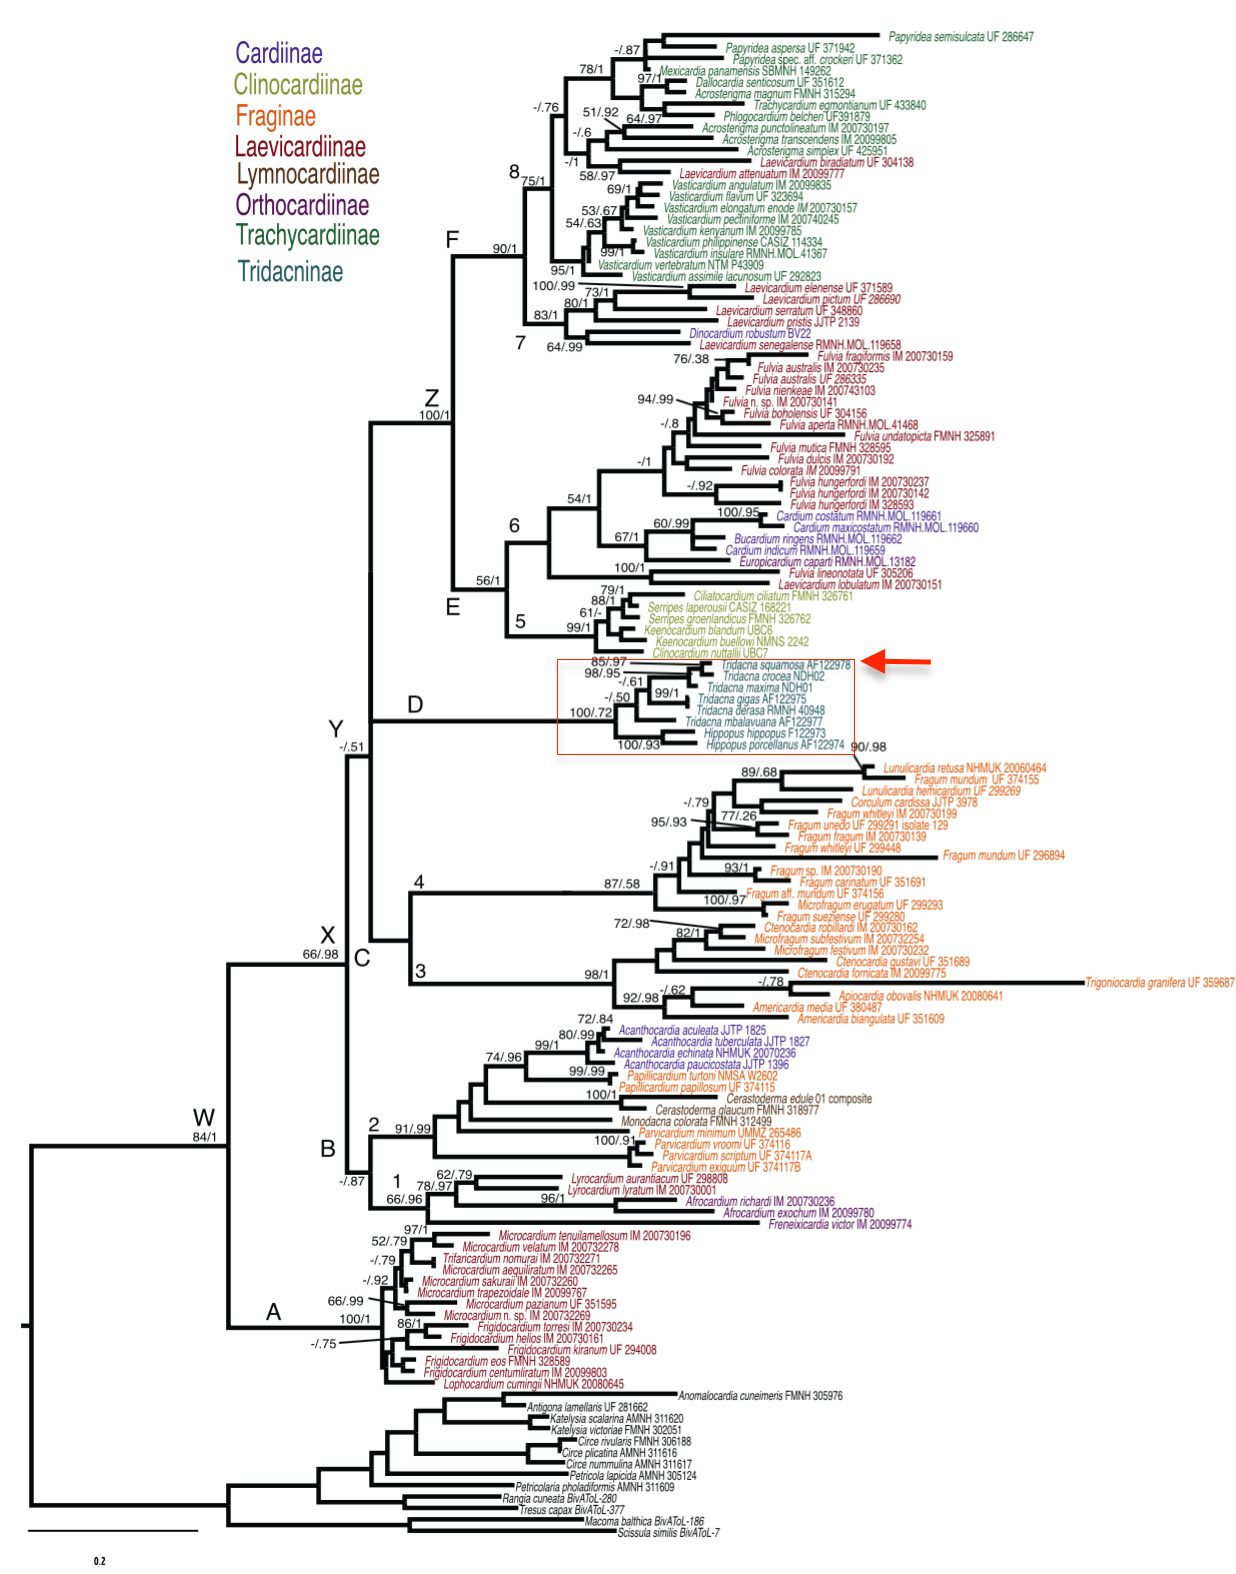 cardiidae_phylogeny1.png